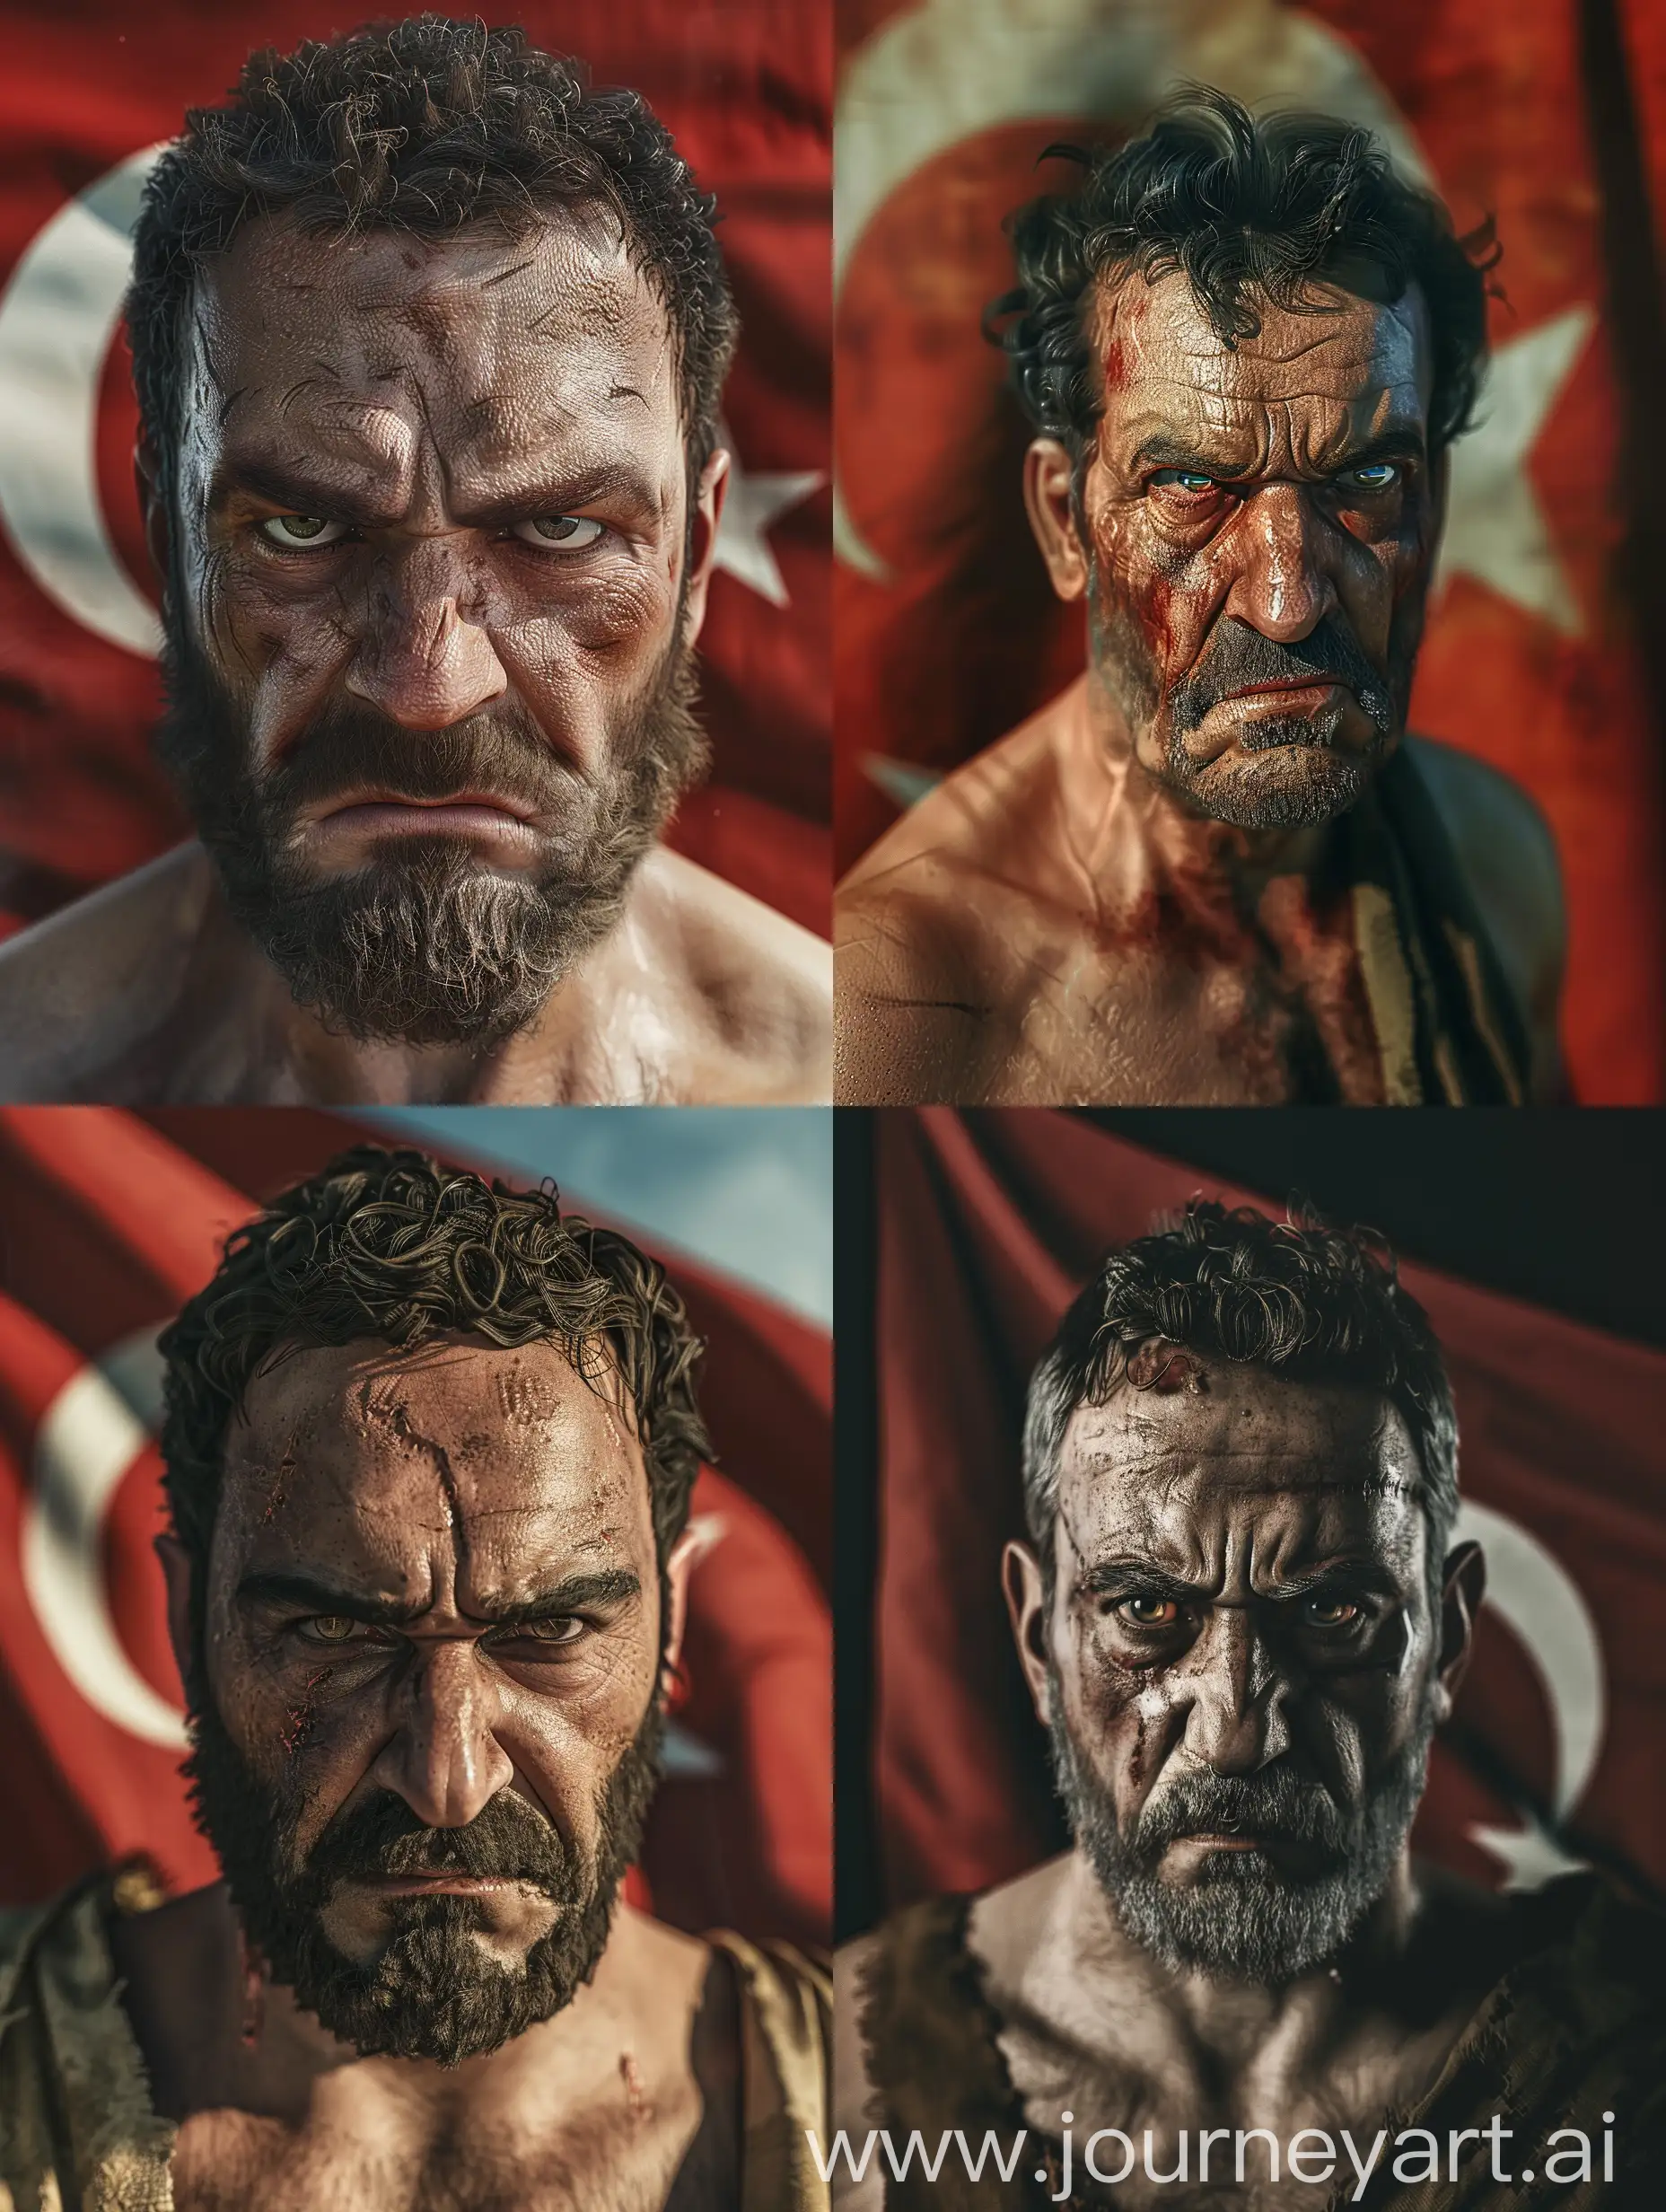 Furious-Ancient-Greek-Man-Staring-with-Intensity-Against-Turkish-Flag-Backdrop